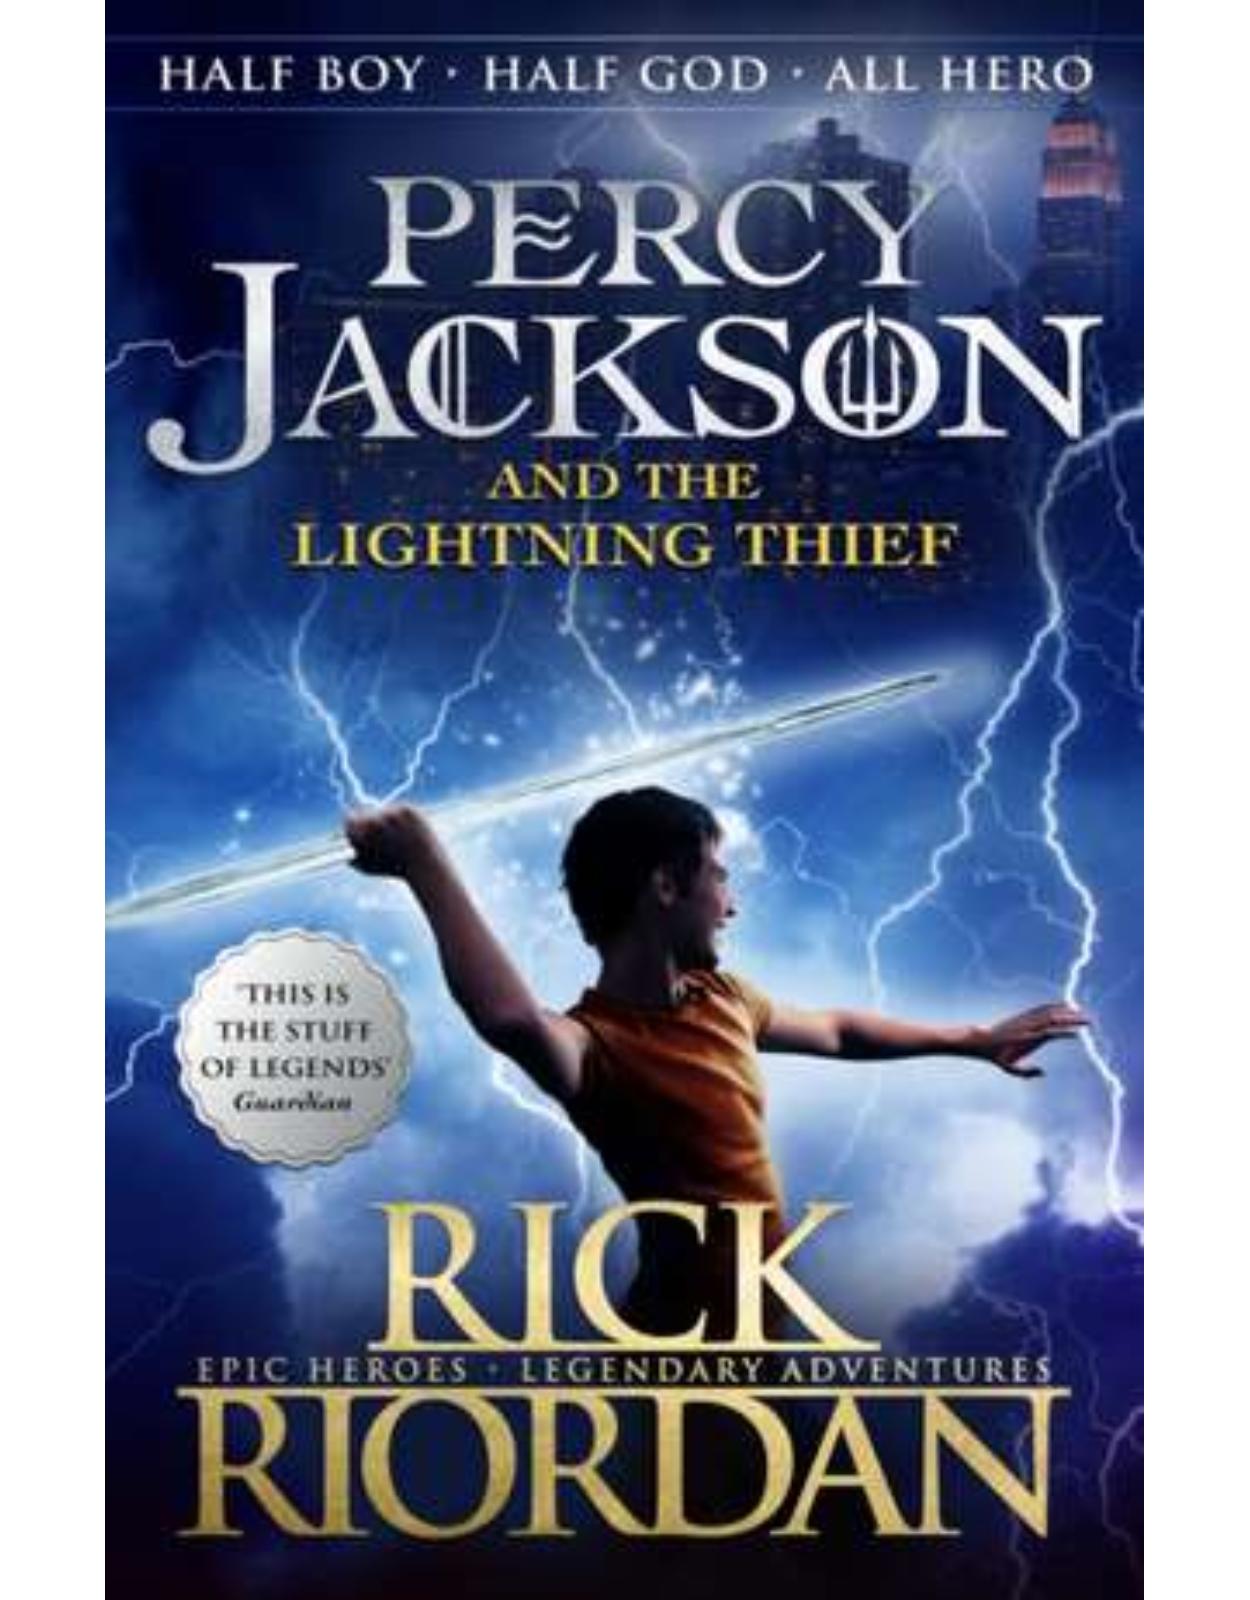 The Lightning Thief : Percy Jackson and the Olympians vol 1